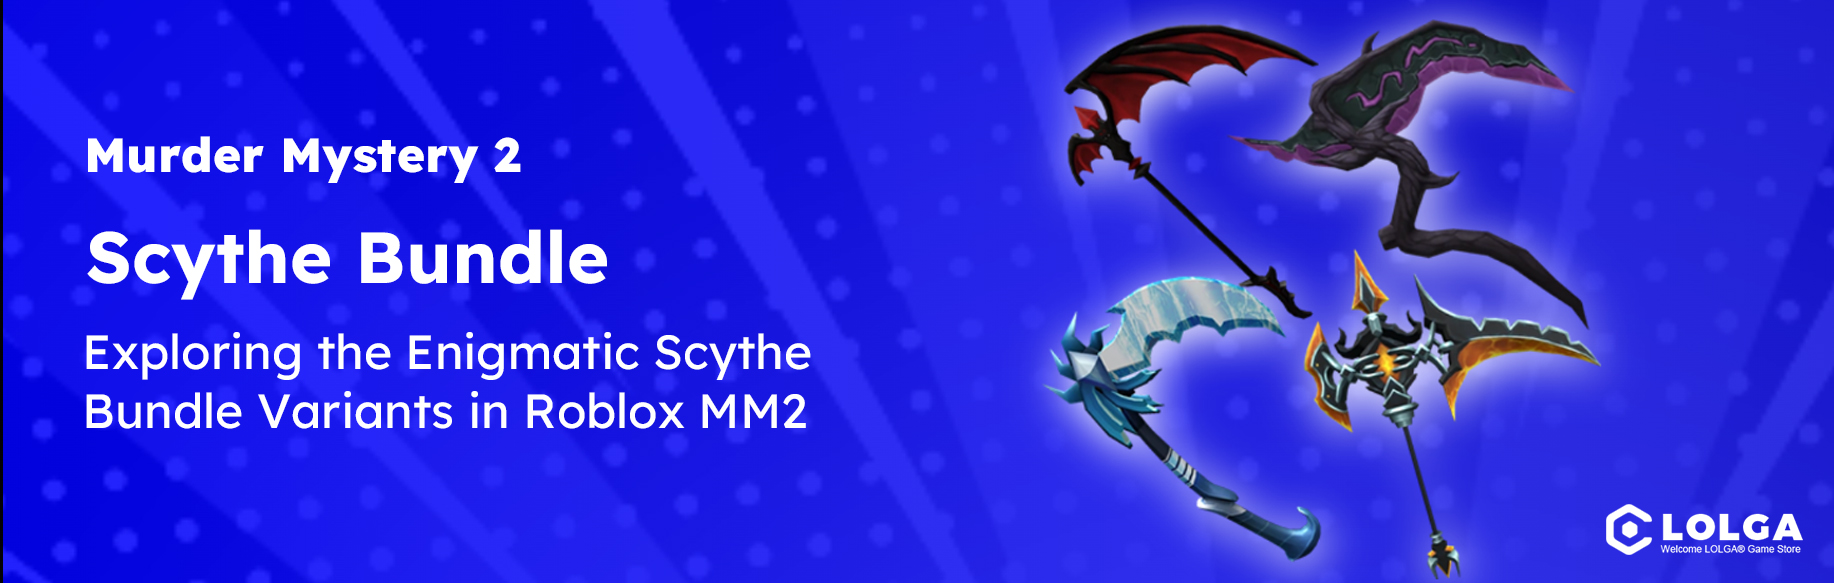 Exploring the Enigmatic Scythe Bundle Variants in Roblox MM2